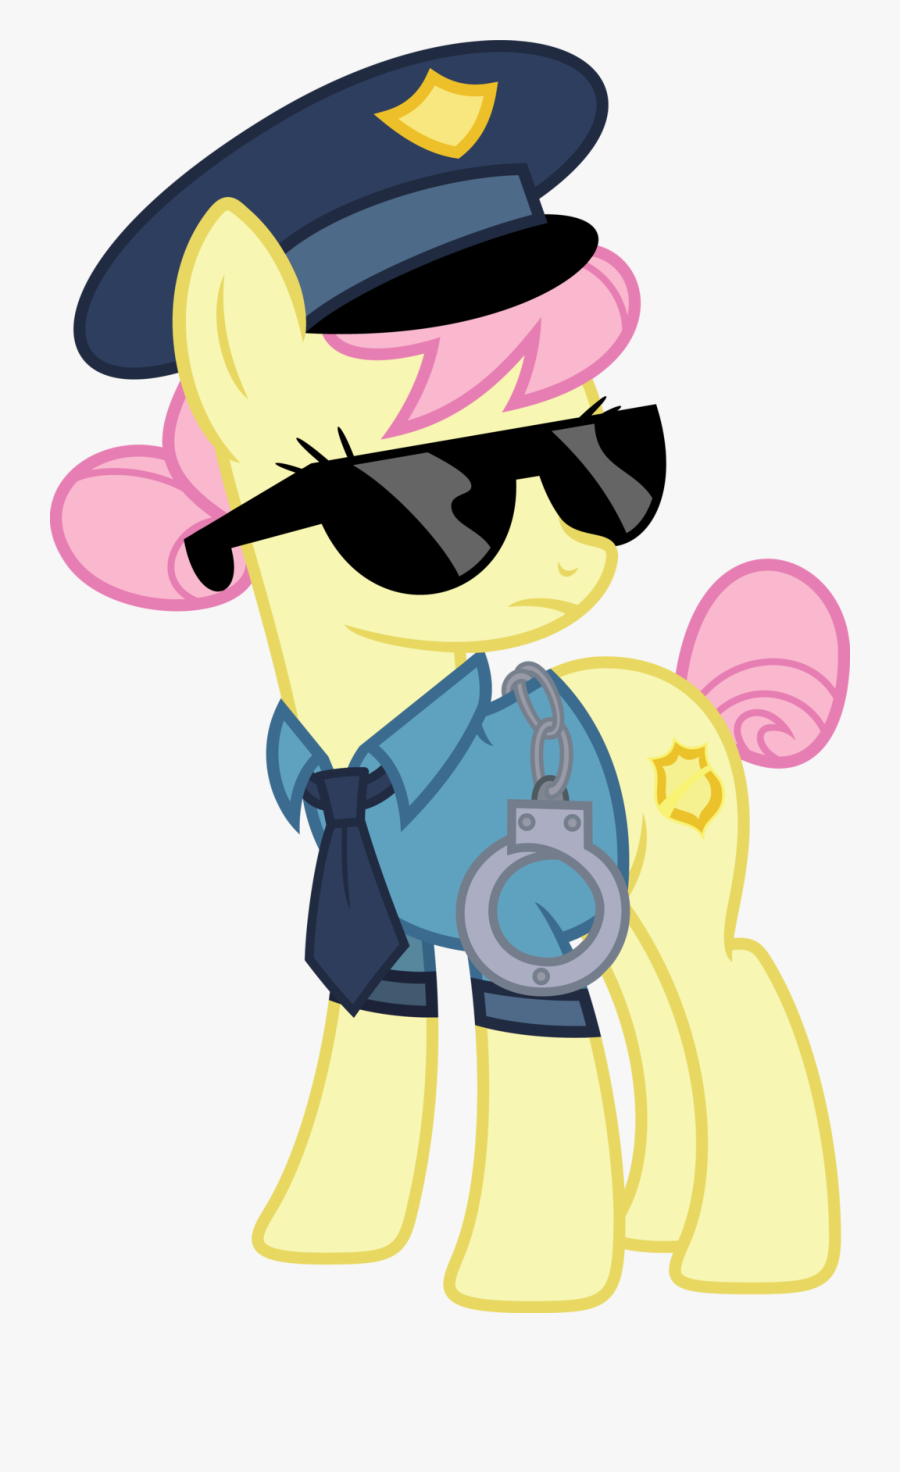 Policeman Clipart Ticket Checker - Police My Little Pony, Transparent Clipart